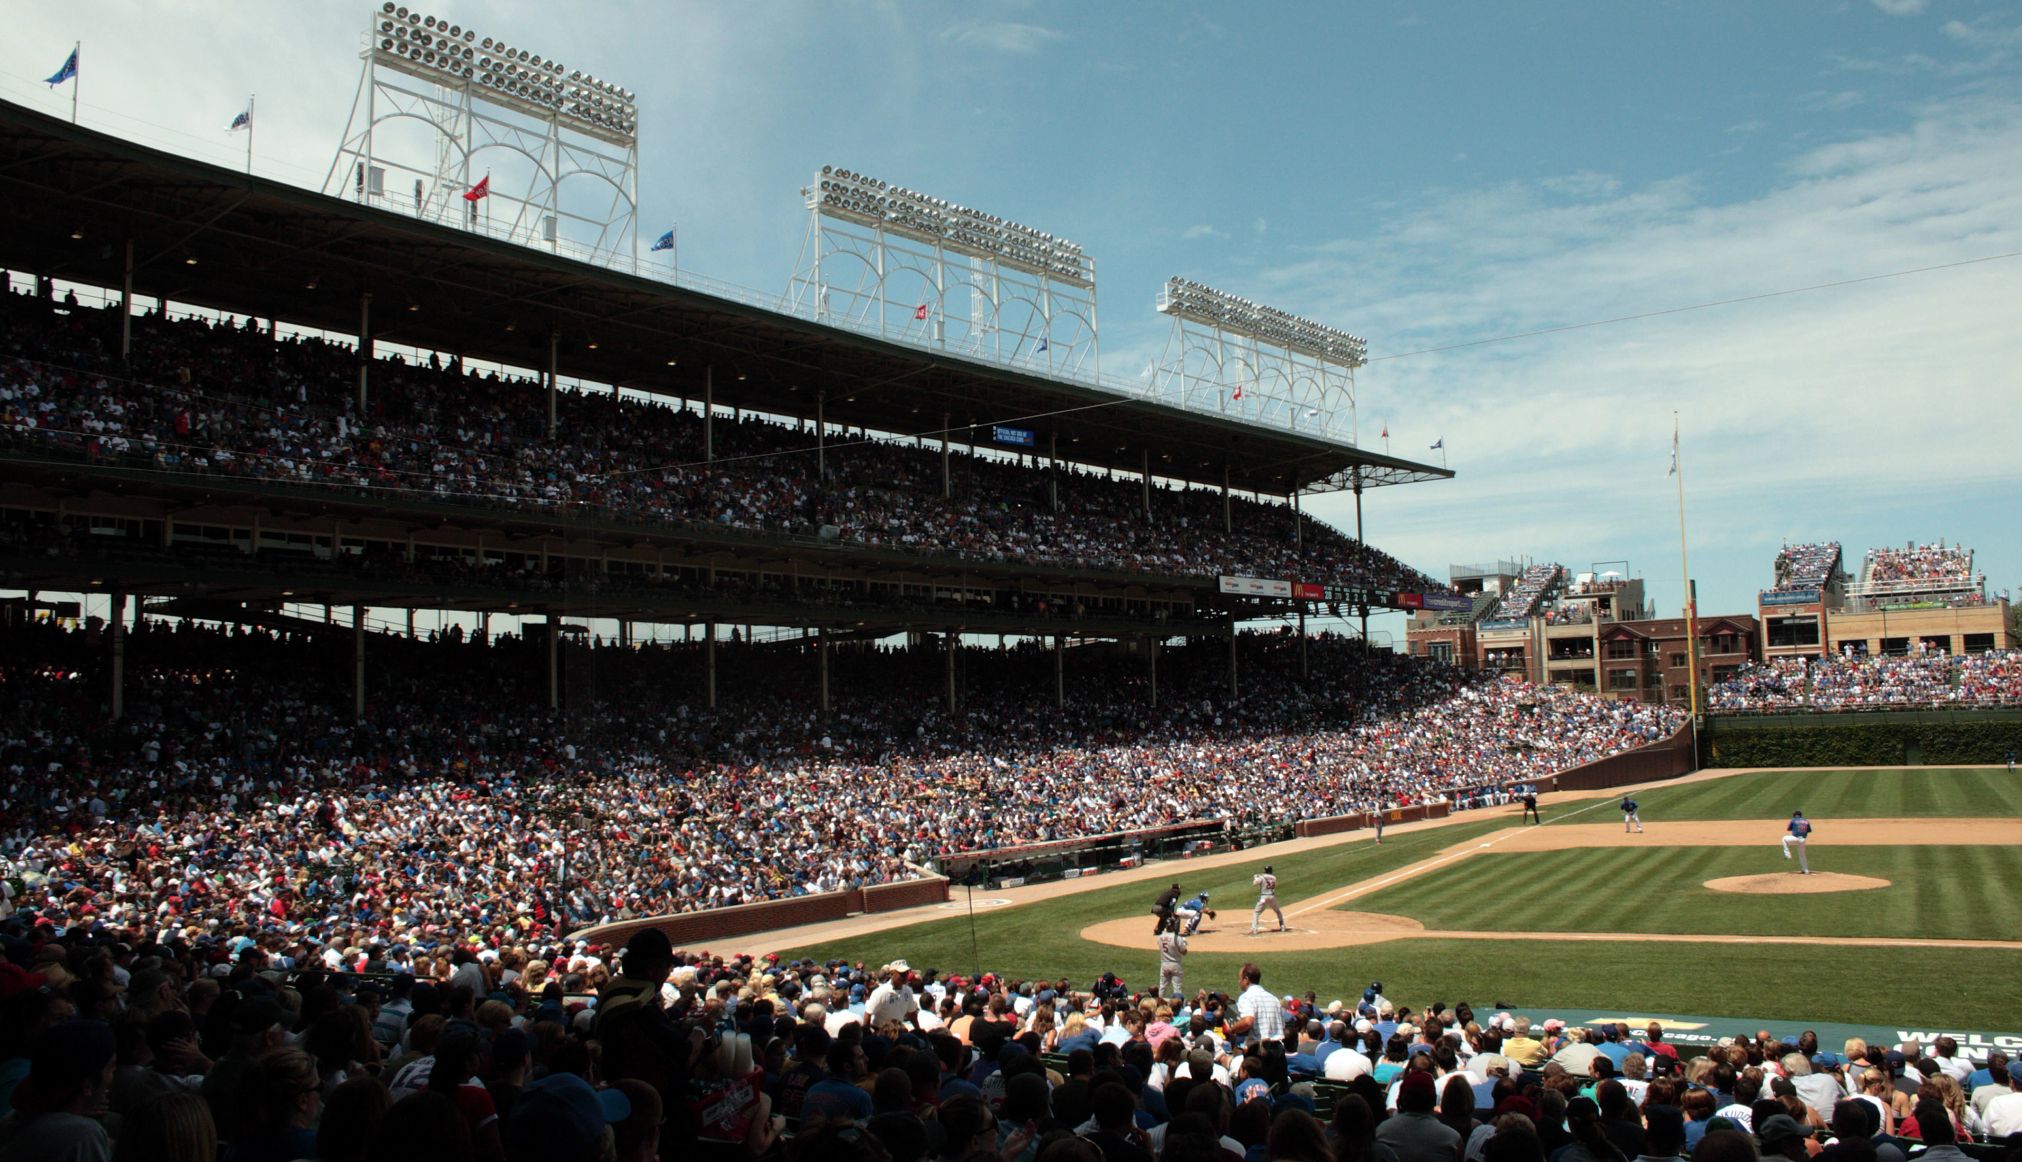 fans at Chicago’s Wrigley Field